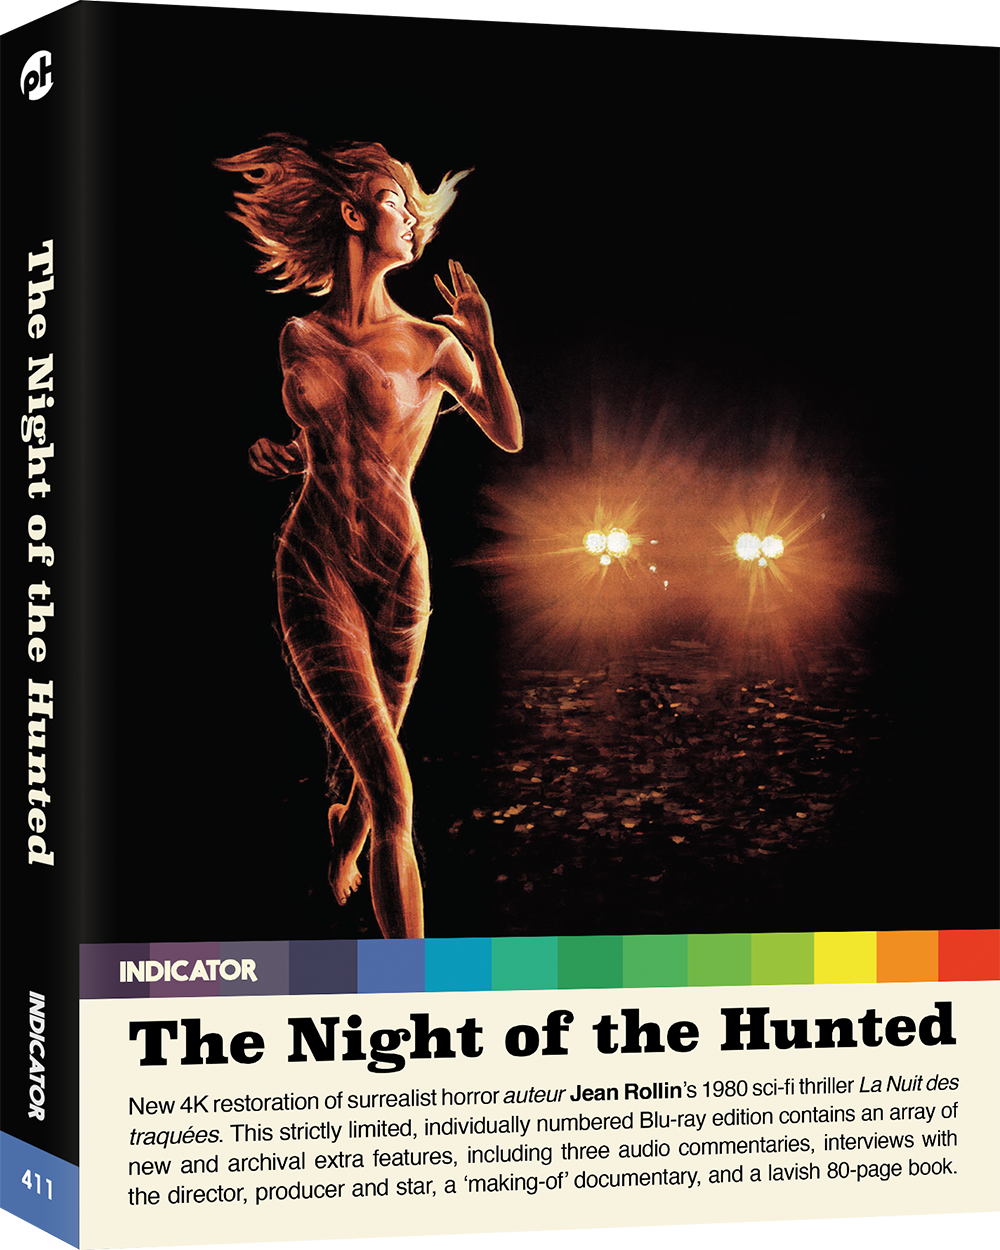 THE NIGHT OF THE HUNTED - Blu-ray LE [US]